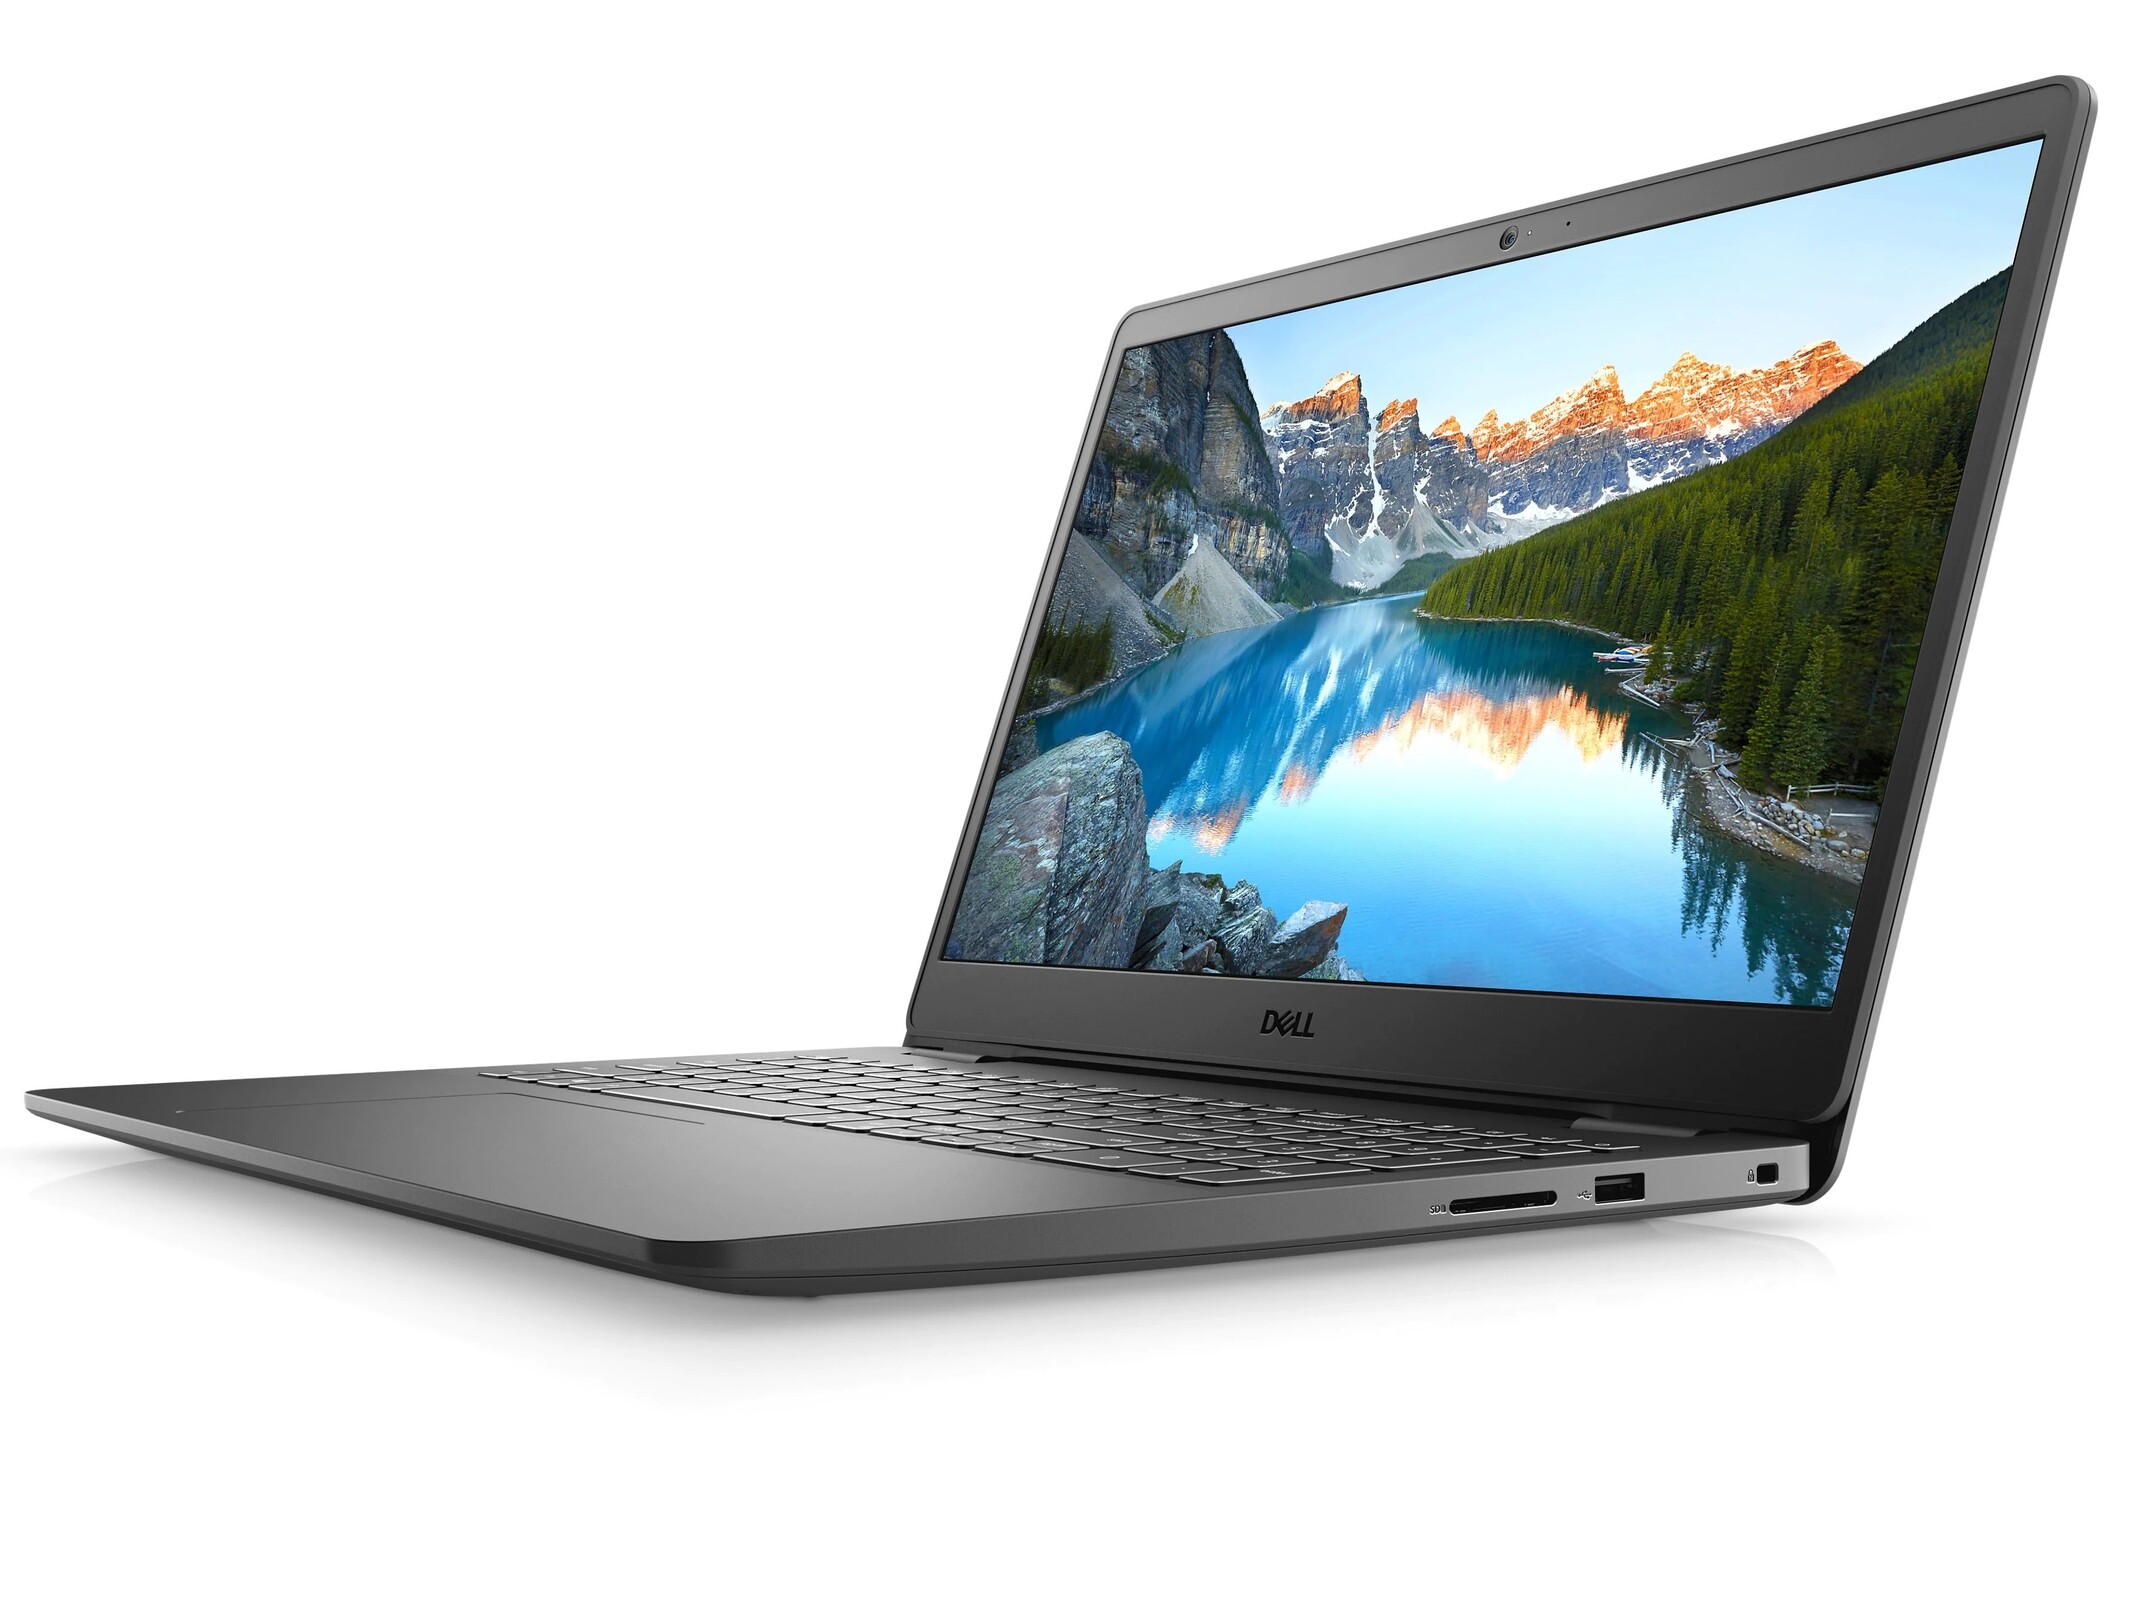 Dell Inspiron 15 3501 on sale with the same 11th gen Core i7 CPU as the